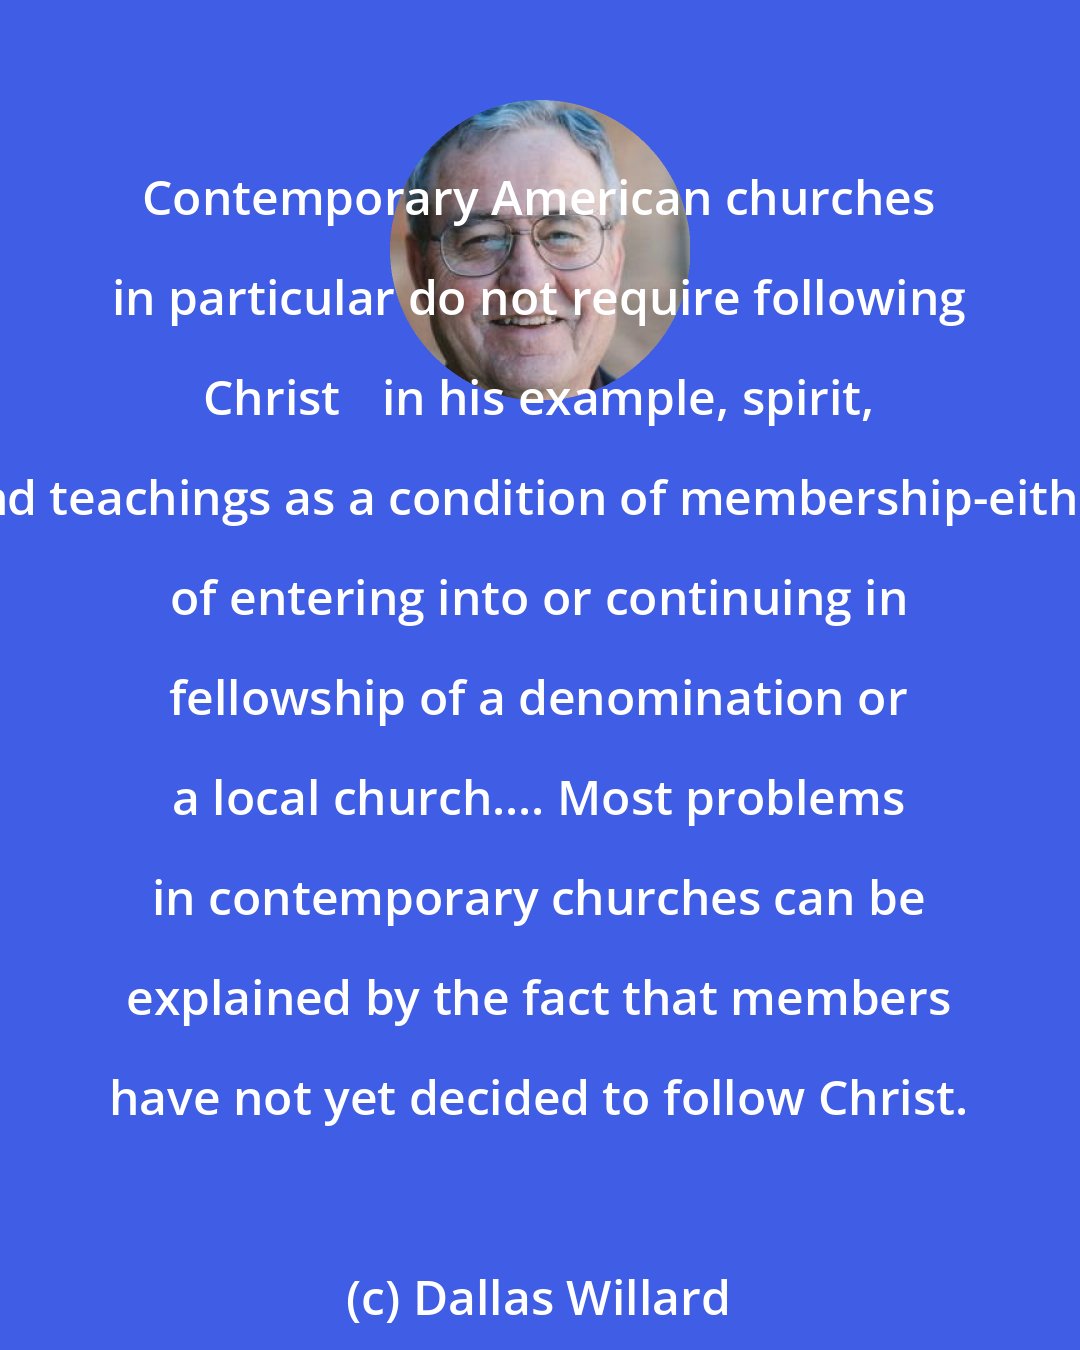 Dallas Willard: Contemporary American churches in particular do not require following Christ 	in his example, spirit, and teachings as a condition of membership-either of entering into or continuing in fellowship of a denomination or a local church.... Most problems in contemporary churches can be explained by the fact that members have not yet decided to follow Christ.